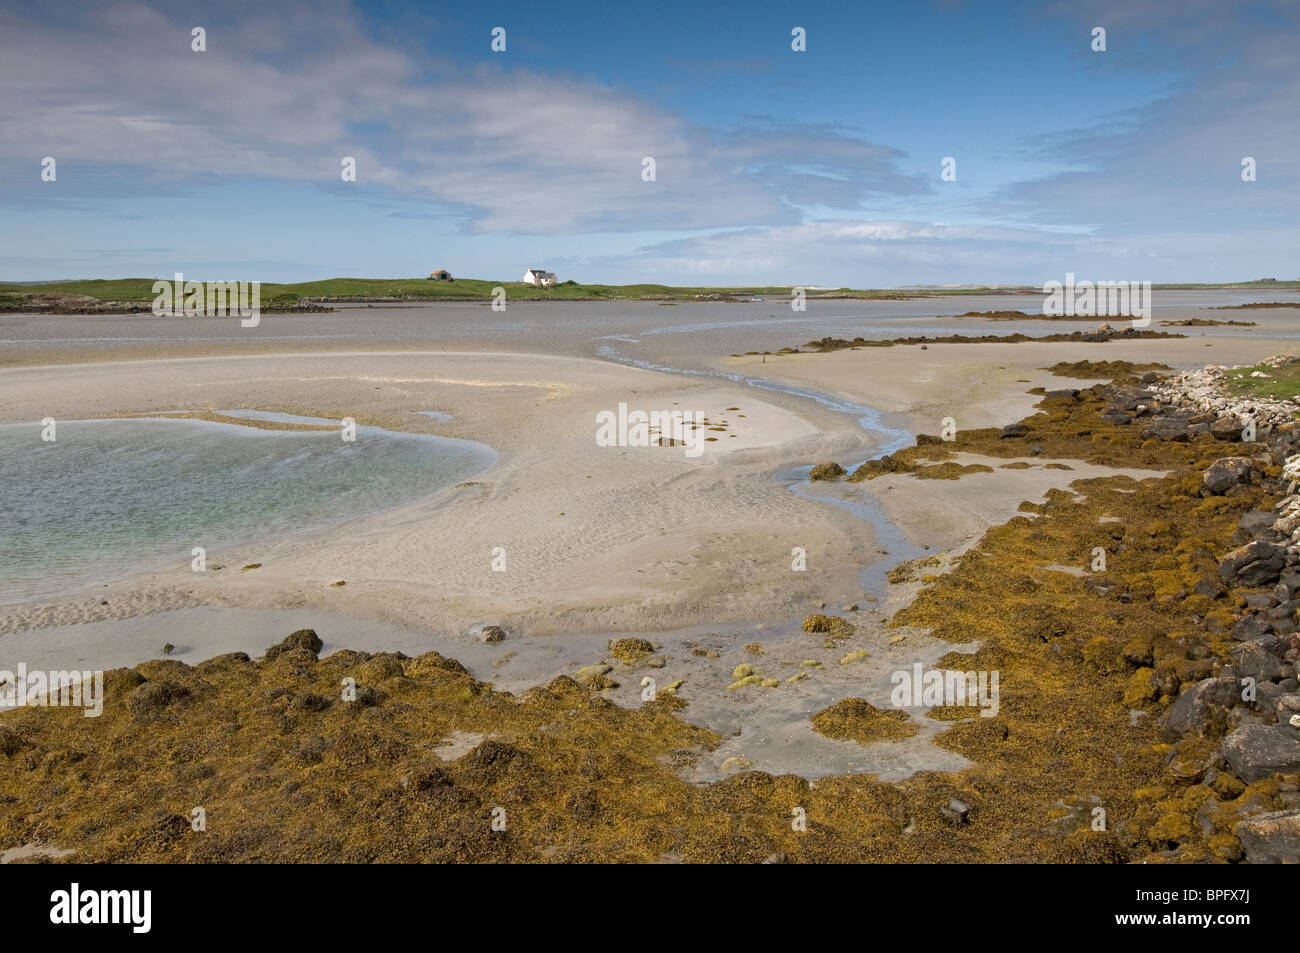 Low Tide on South Uist at Gramsdal, Cairinis, Outer Hebrides, Western Isles, Scotland.  SCO 6443 Stock Photo